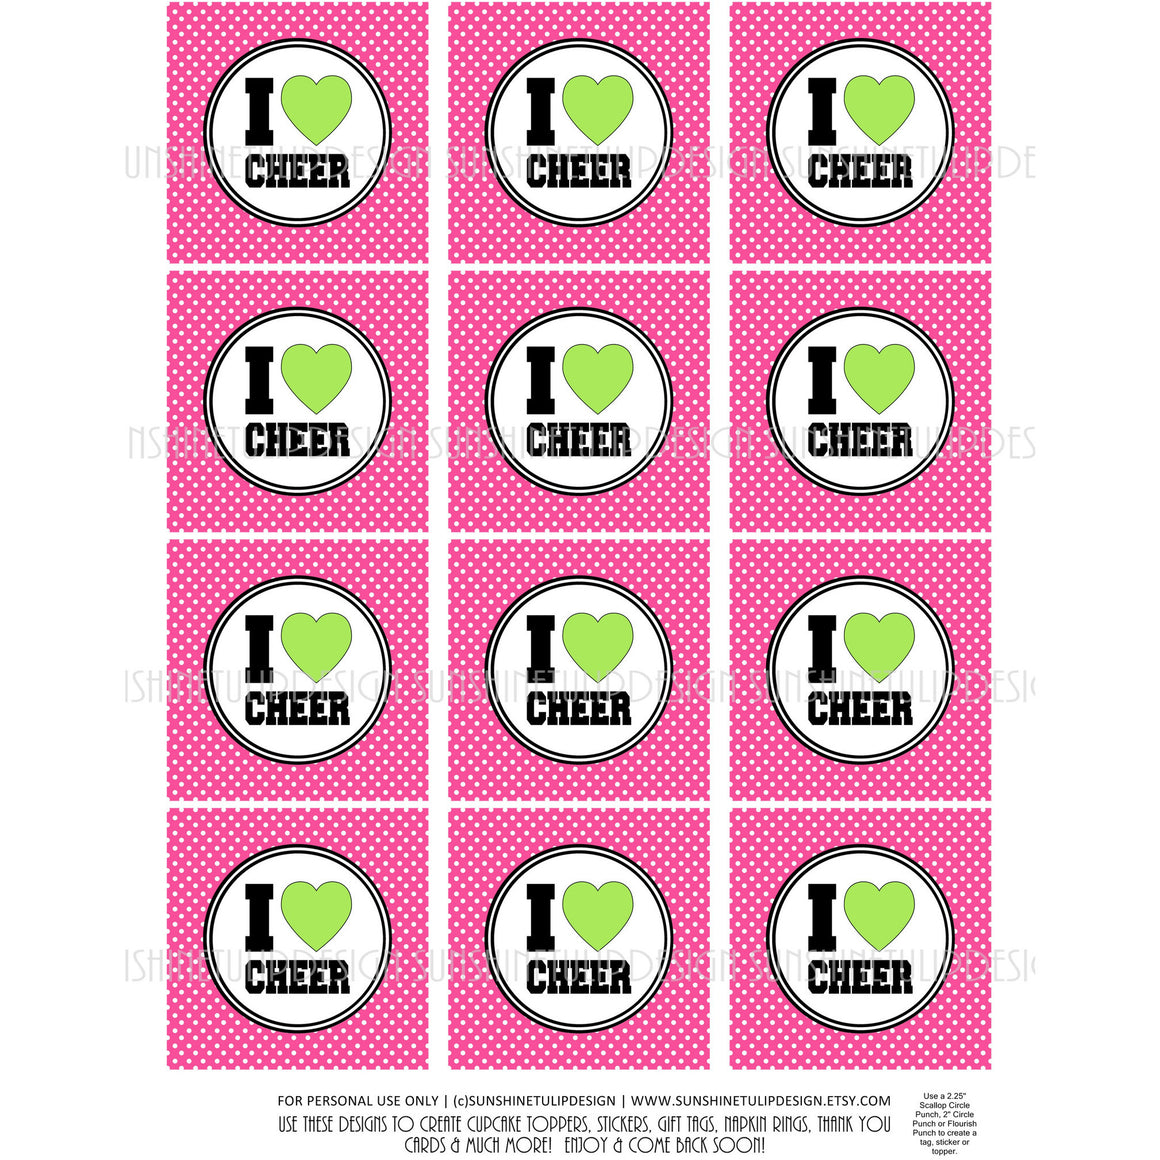 Printable Cheer Cupcake Toppers, I LOVE Cheer Cupcake Toppers, Cheer Sticker Labels & Gift Tags by SUNSHINETULIPDESIGN - Sunshinetulipdesign